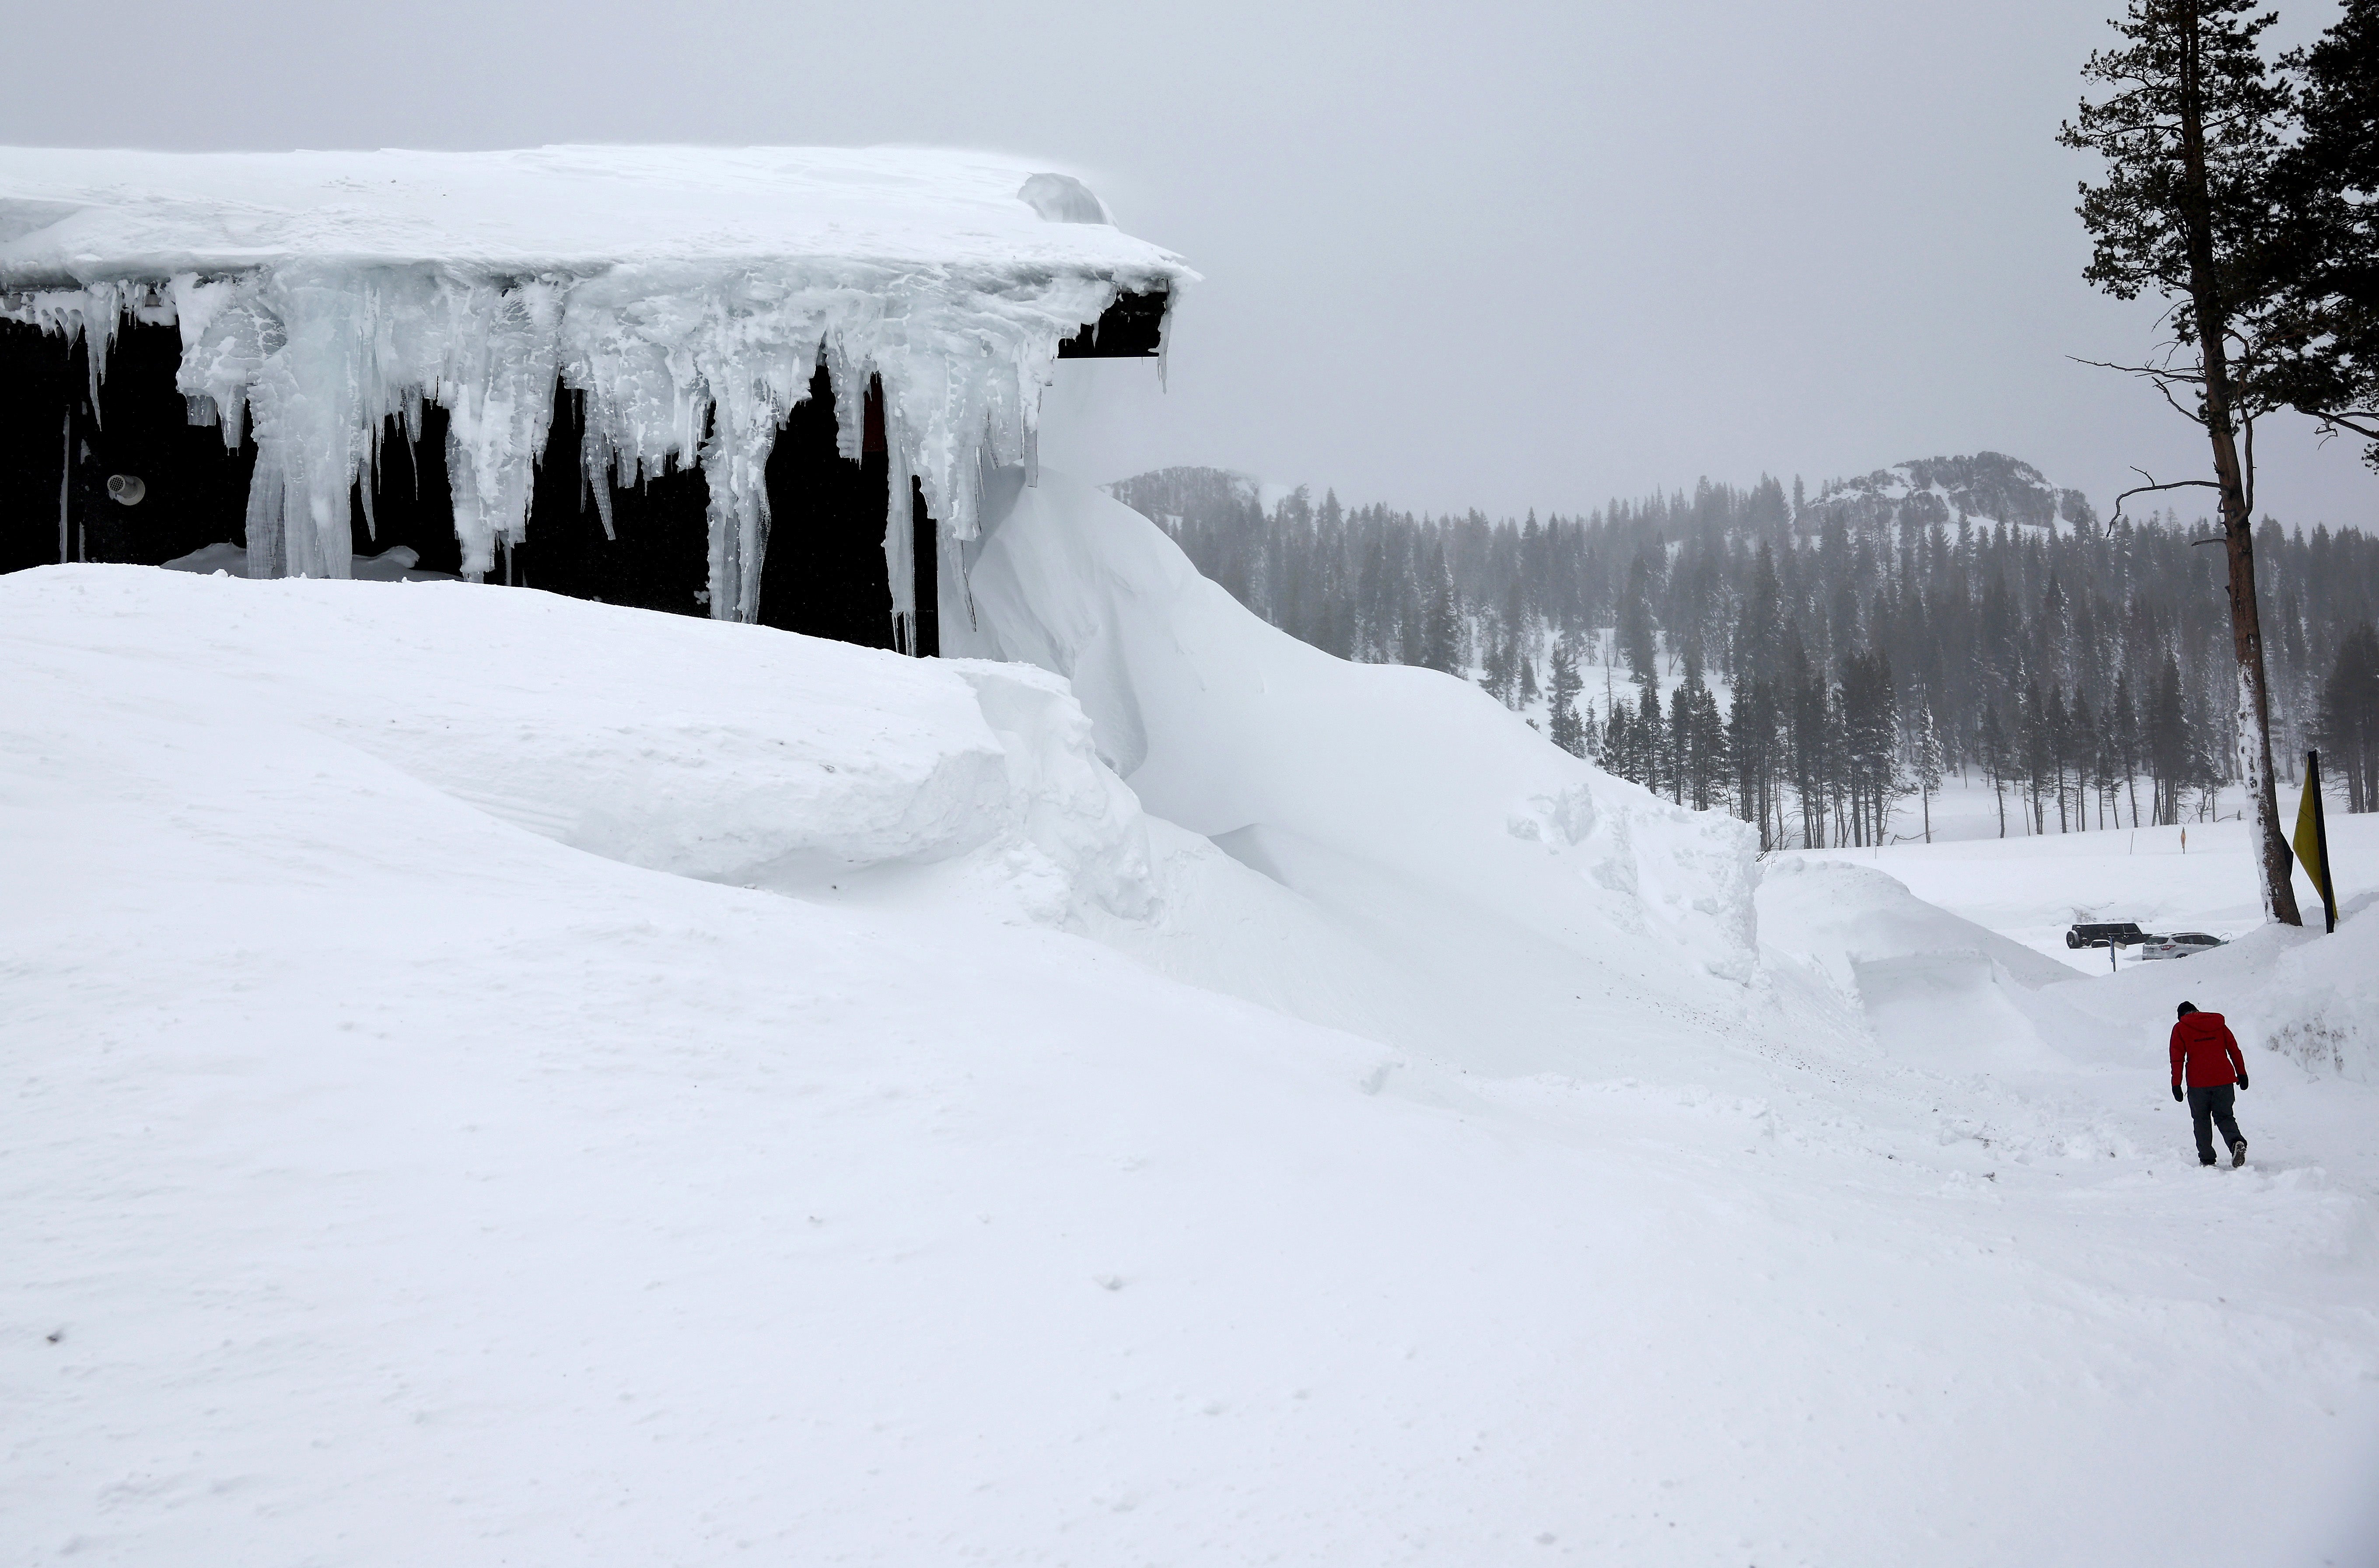 : A person walks at Boreal Mountain Resort, currently shuttered due to the snowstorm, following a massive snowstorm in the Sierra Nevada mountains on March 04, 2024 at Soda Springs, California